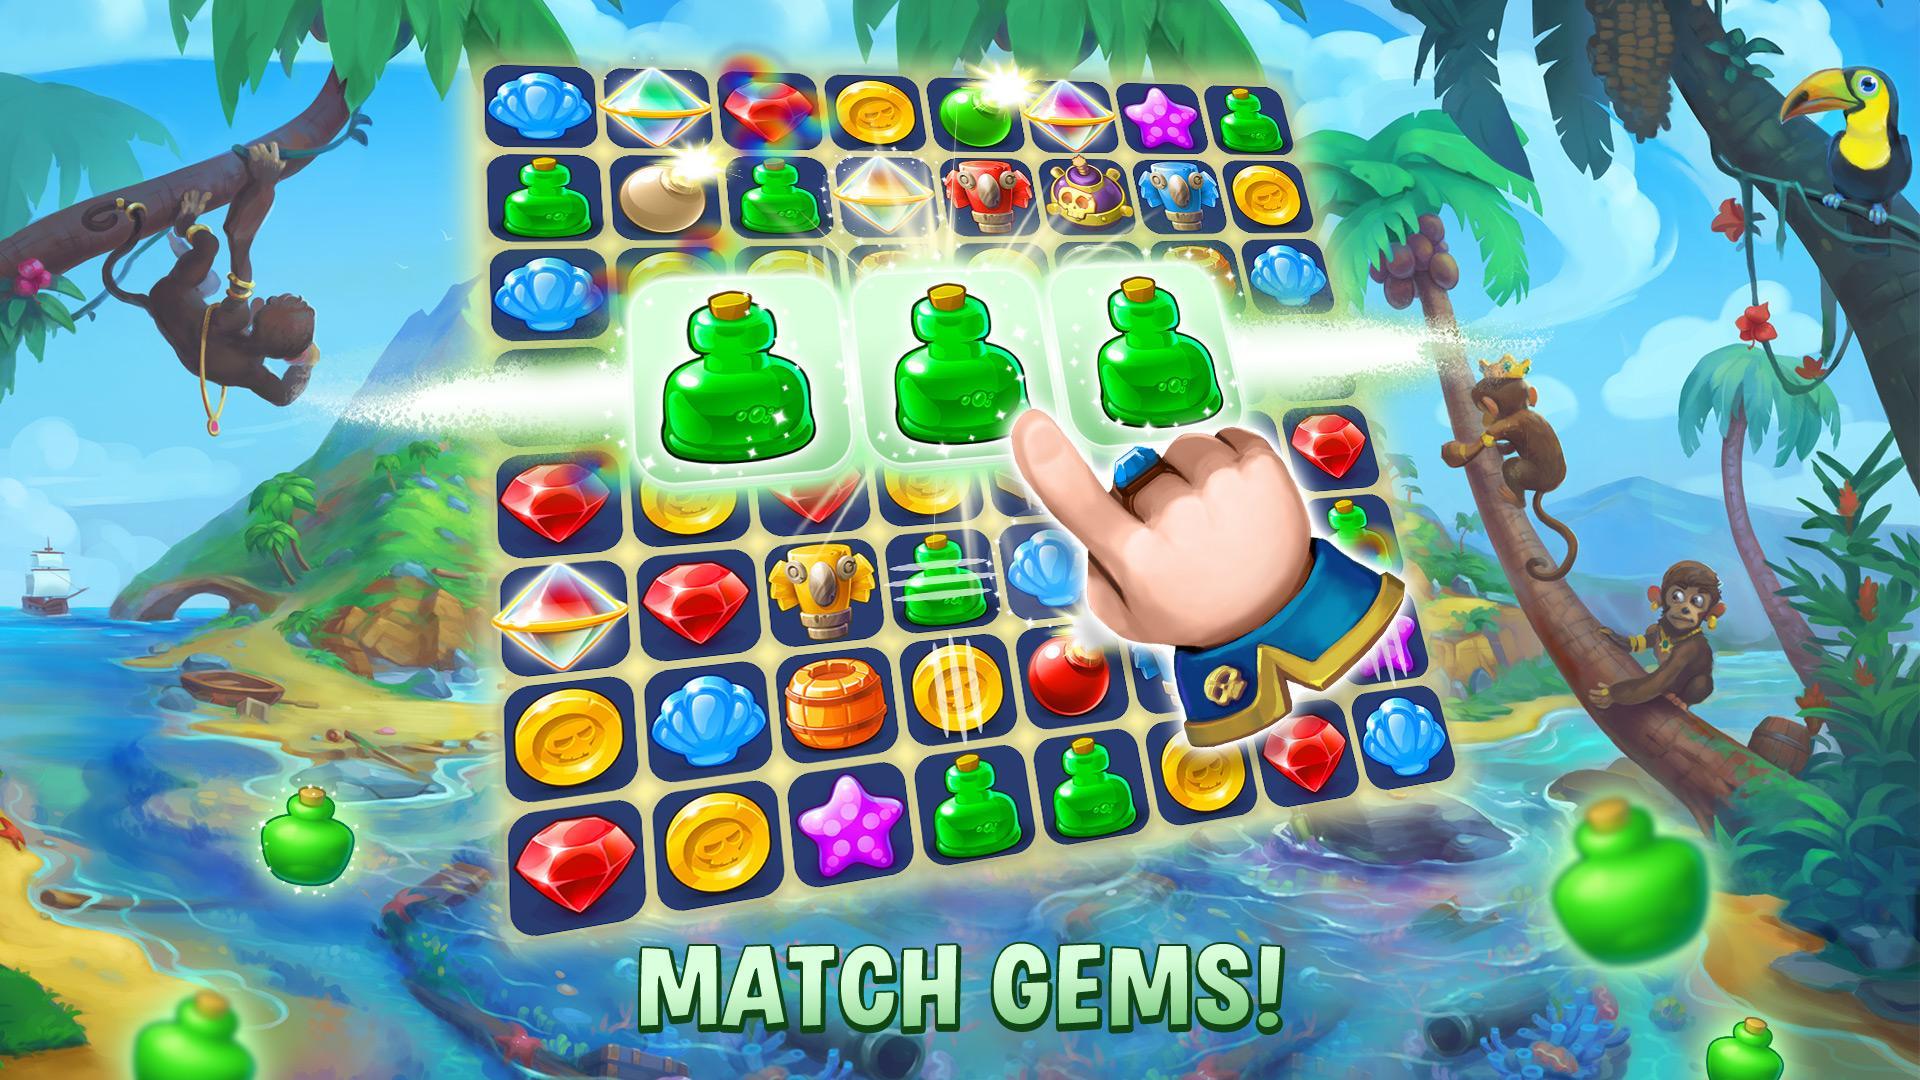 Pirates Pearls Match Build Design For Android Apk Download